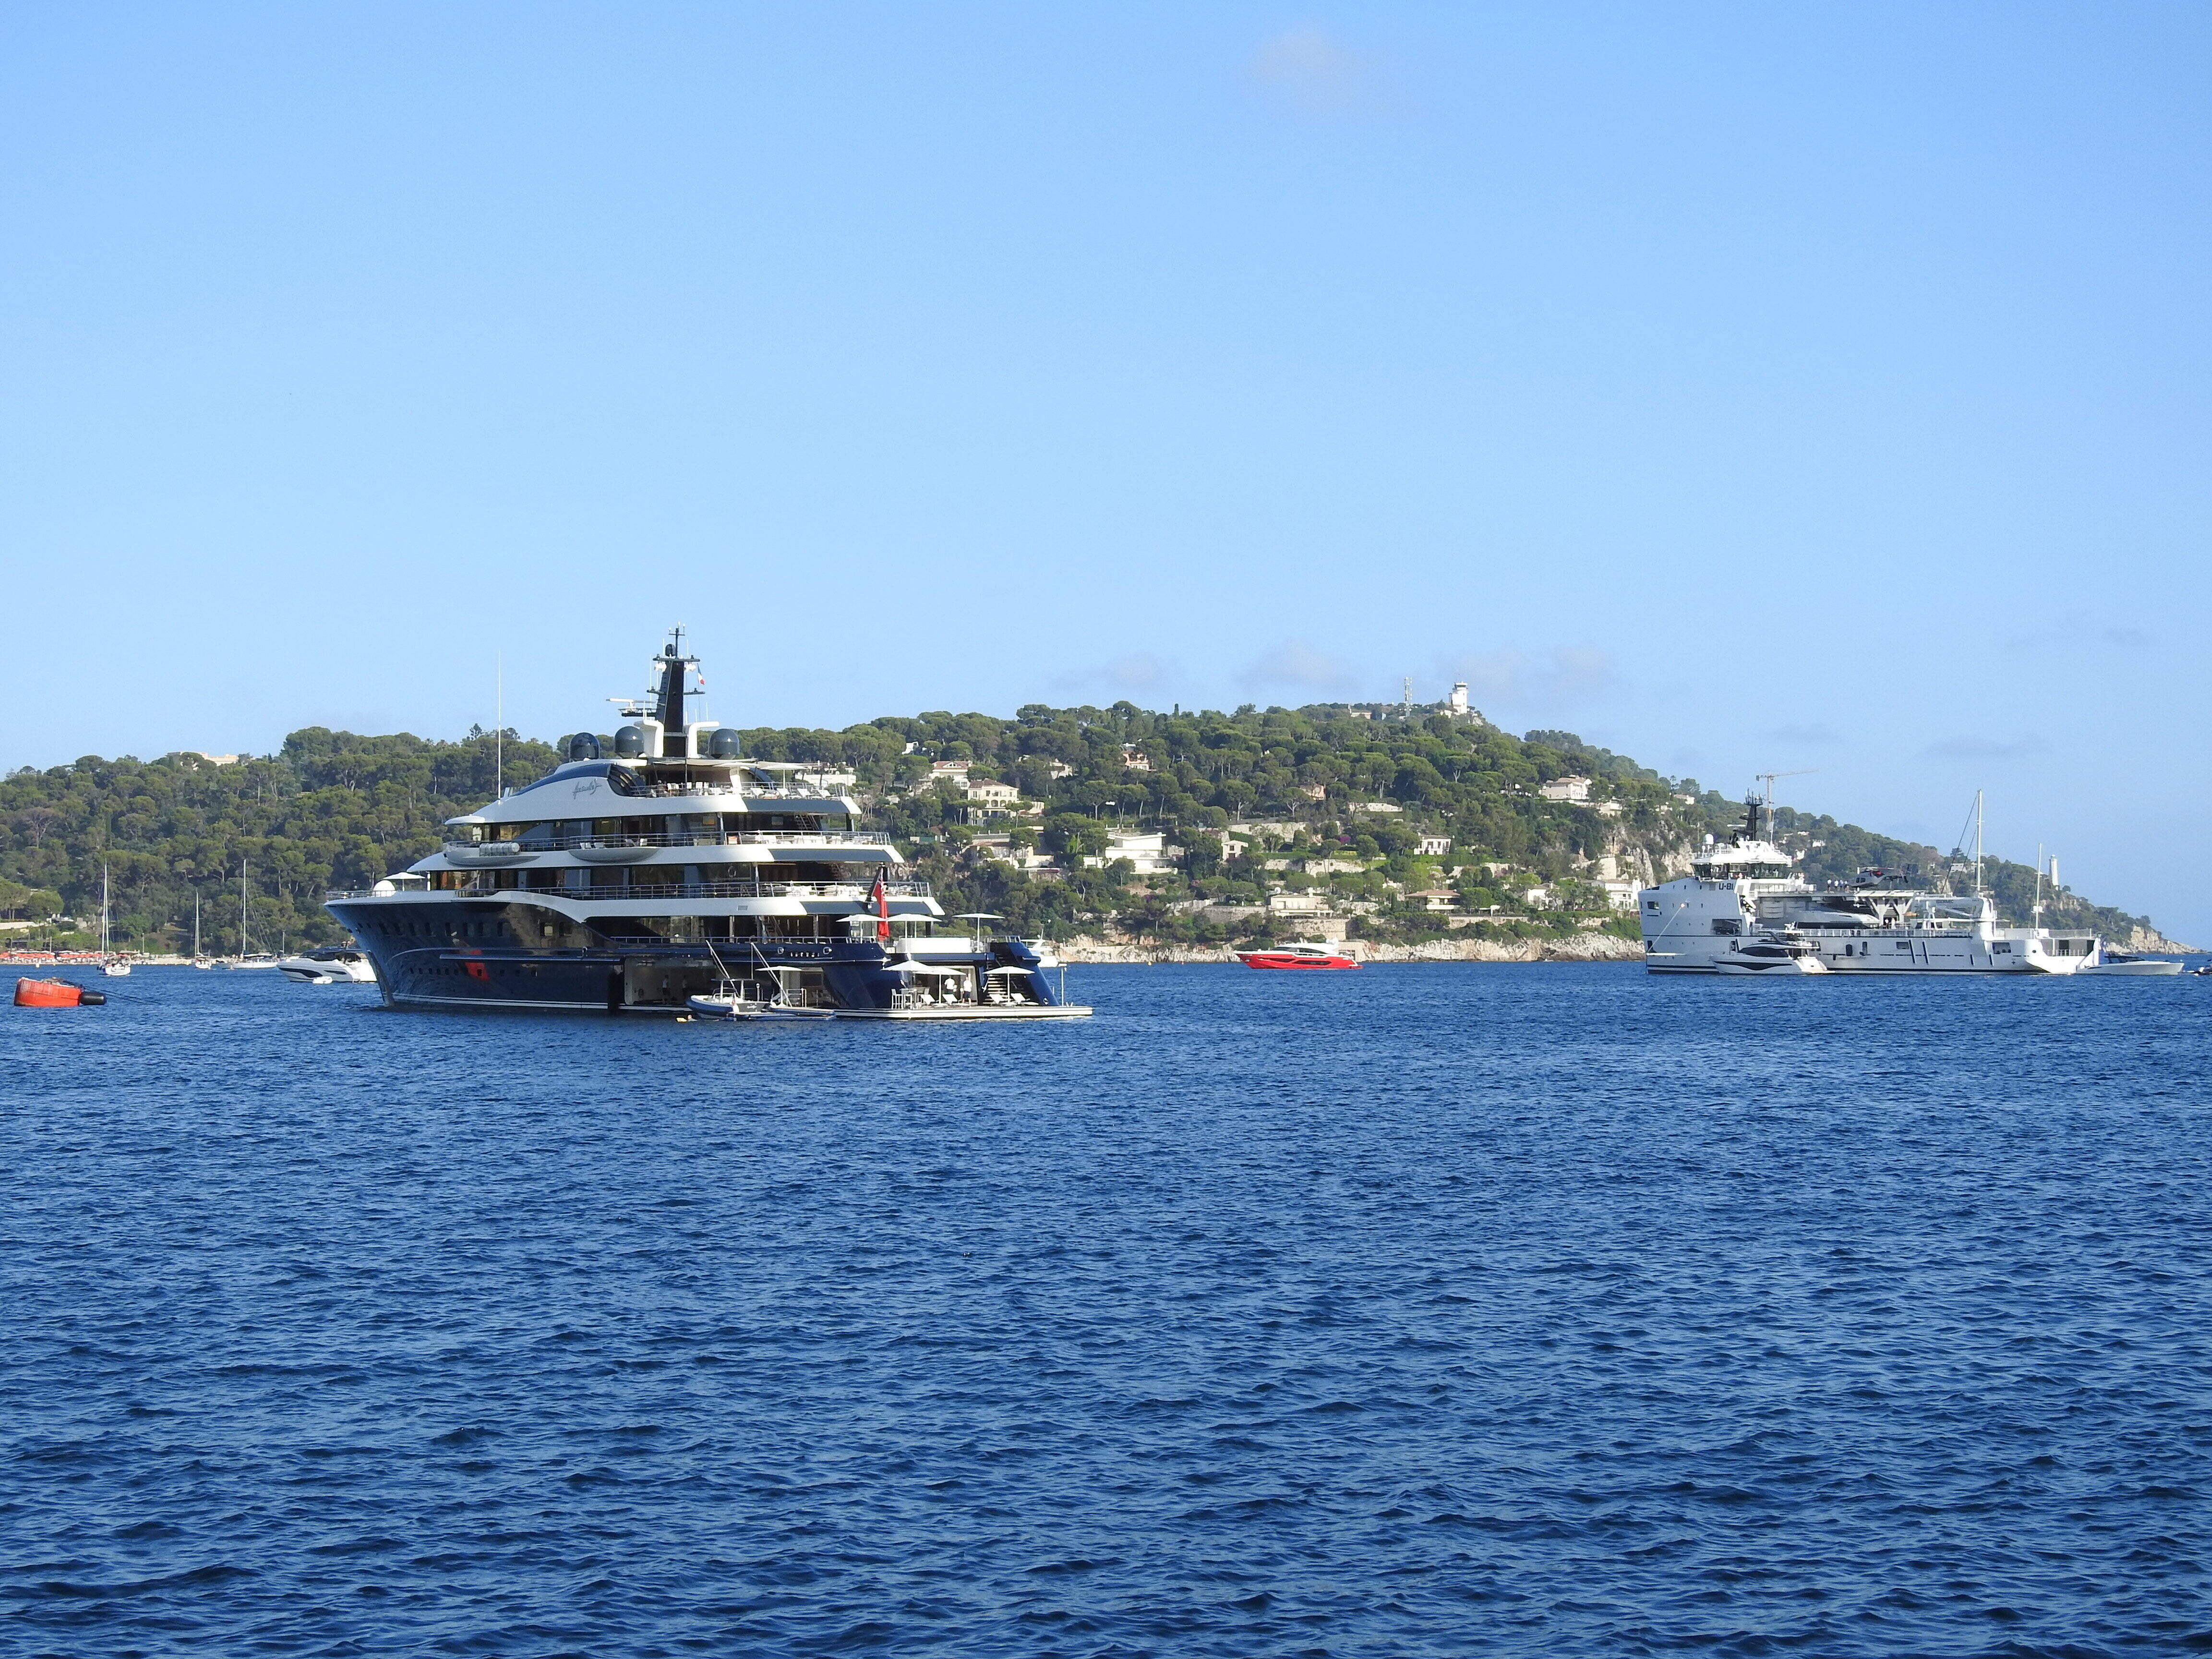 Two yachts from New Zealand’s first fortune anchor in the bay of Villefranche-sur-Mer